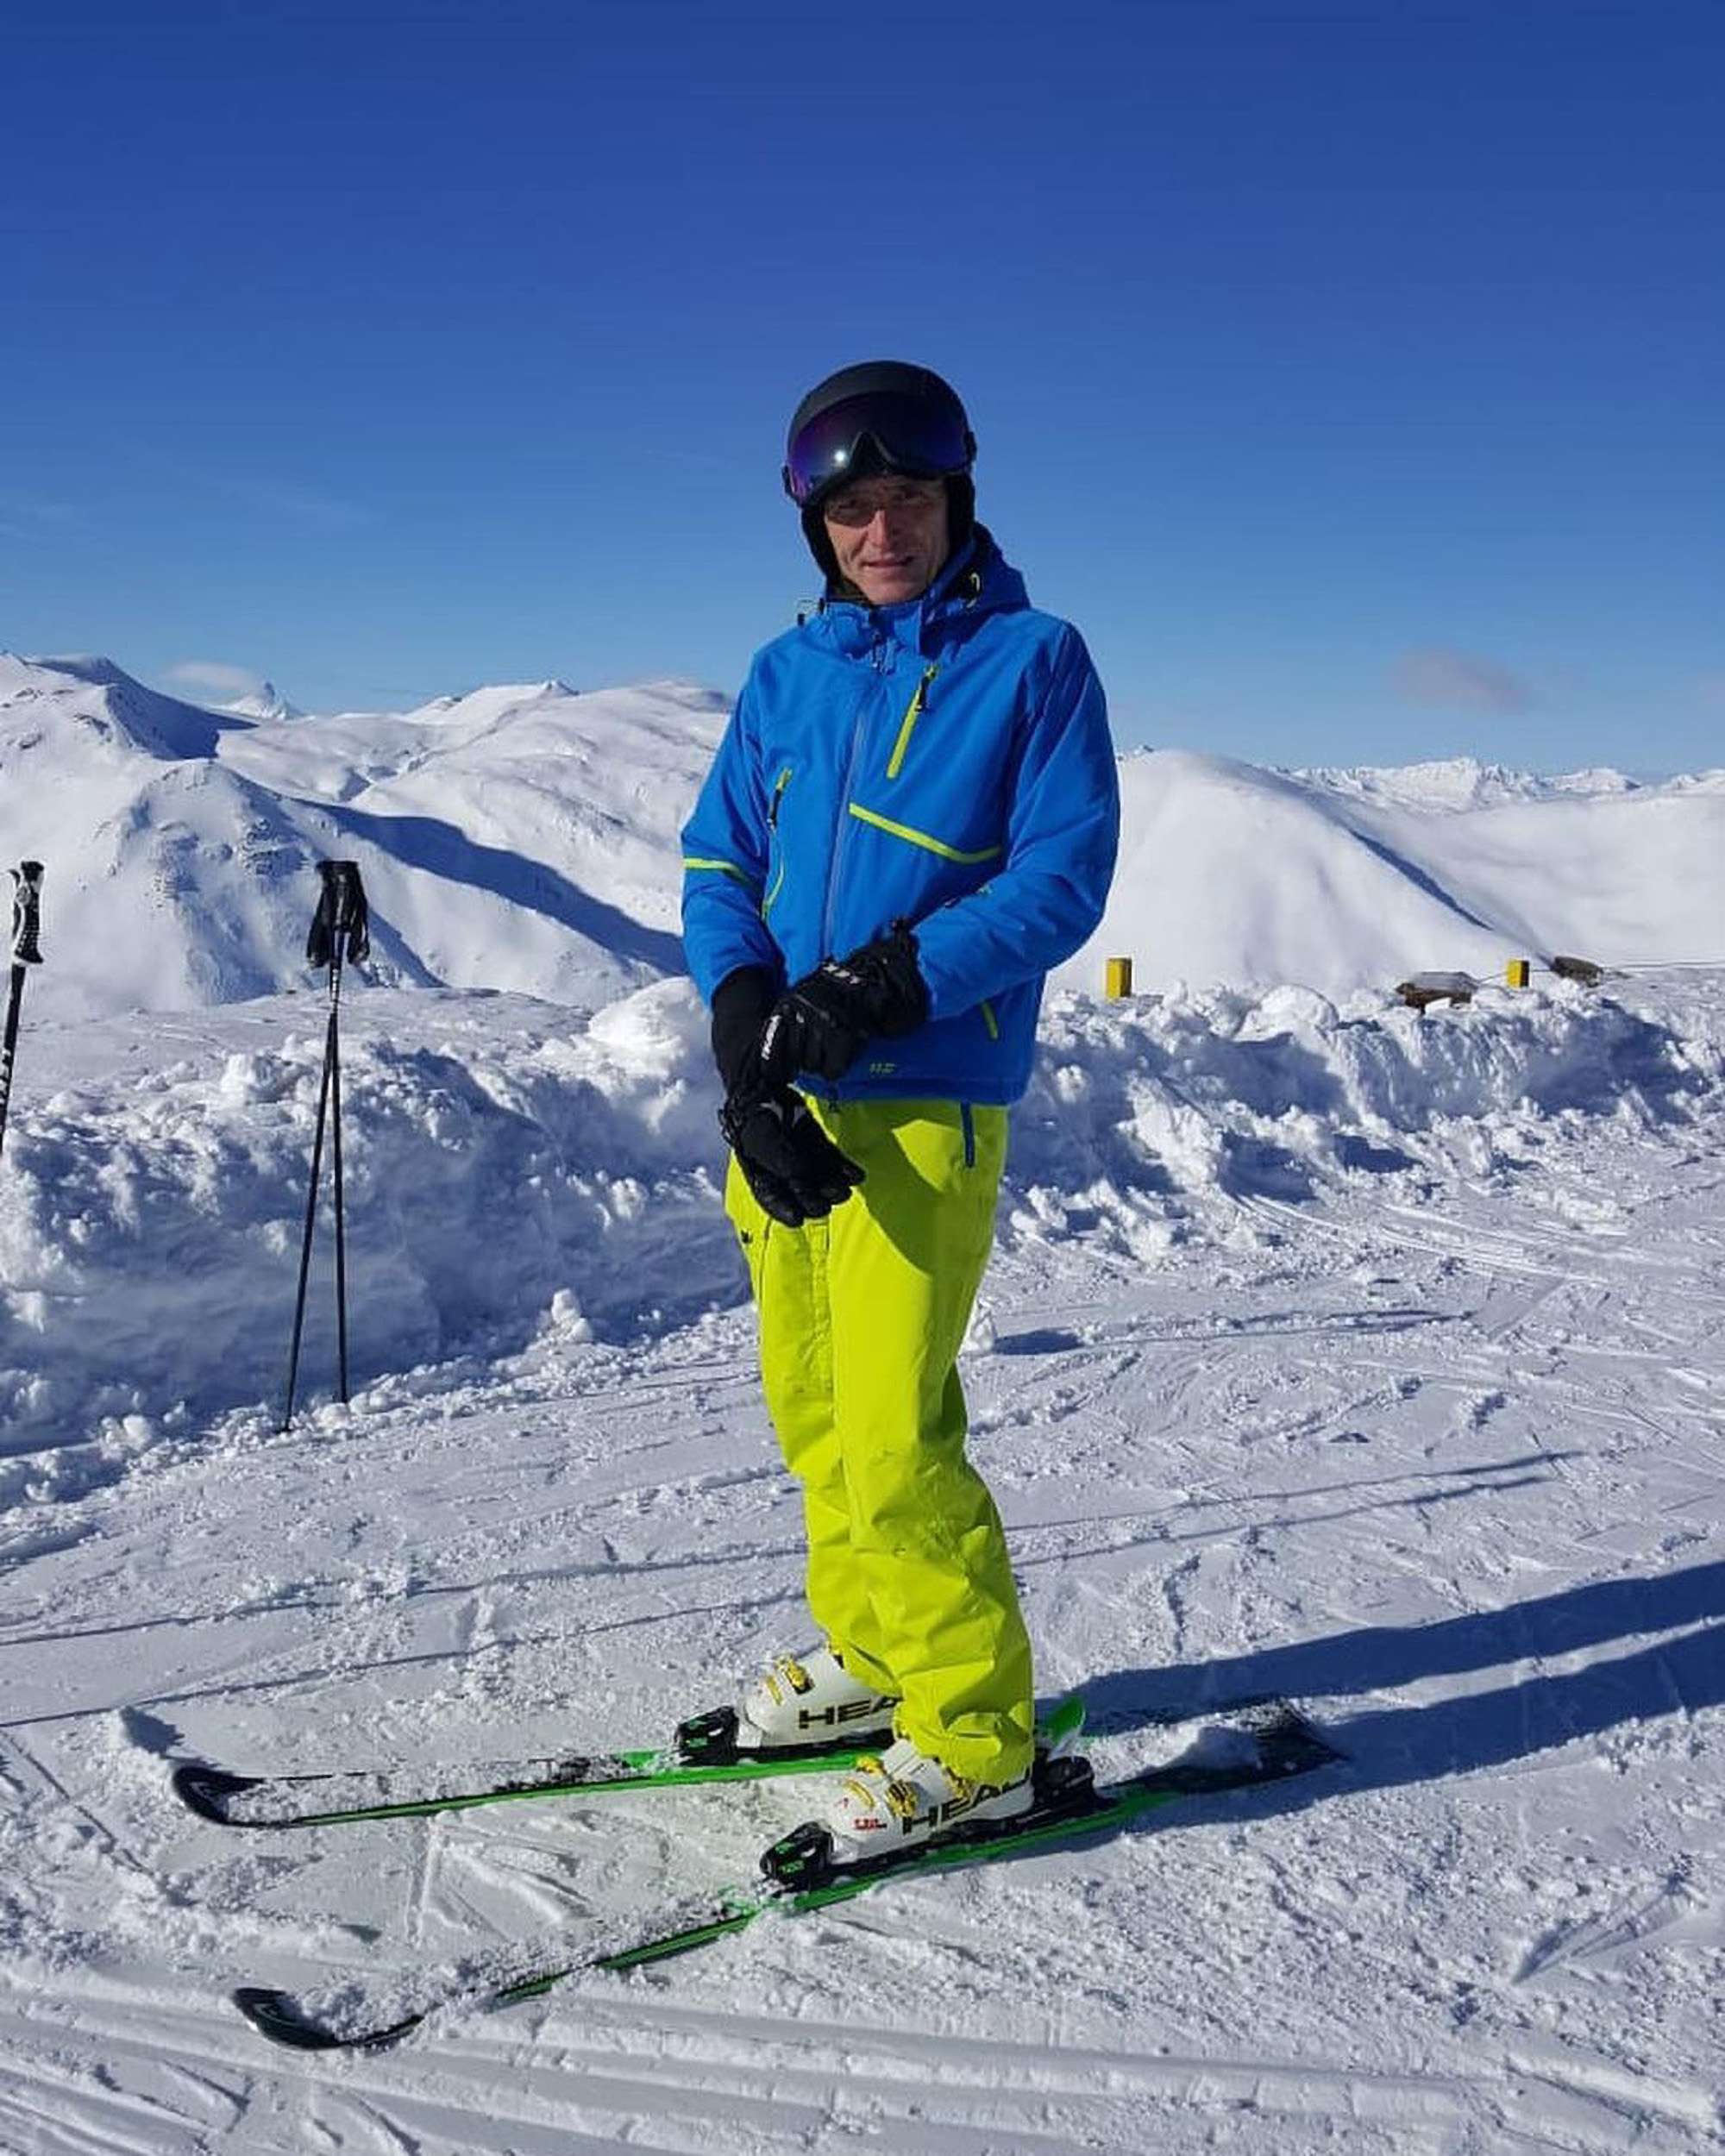 Read more about the article SNOW MIRACLE: Skier Survives 20 Hours Buried Overnight By Avalanche As Temperatures Plunge To Minus 15